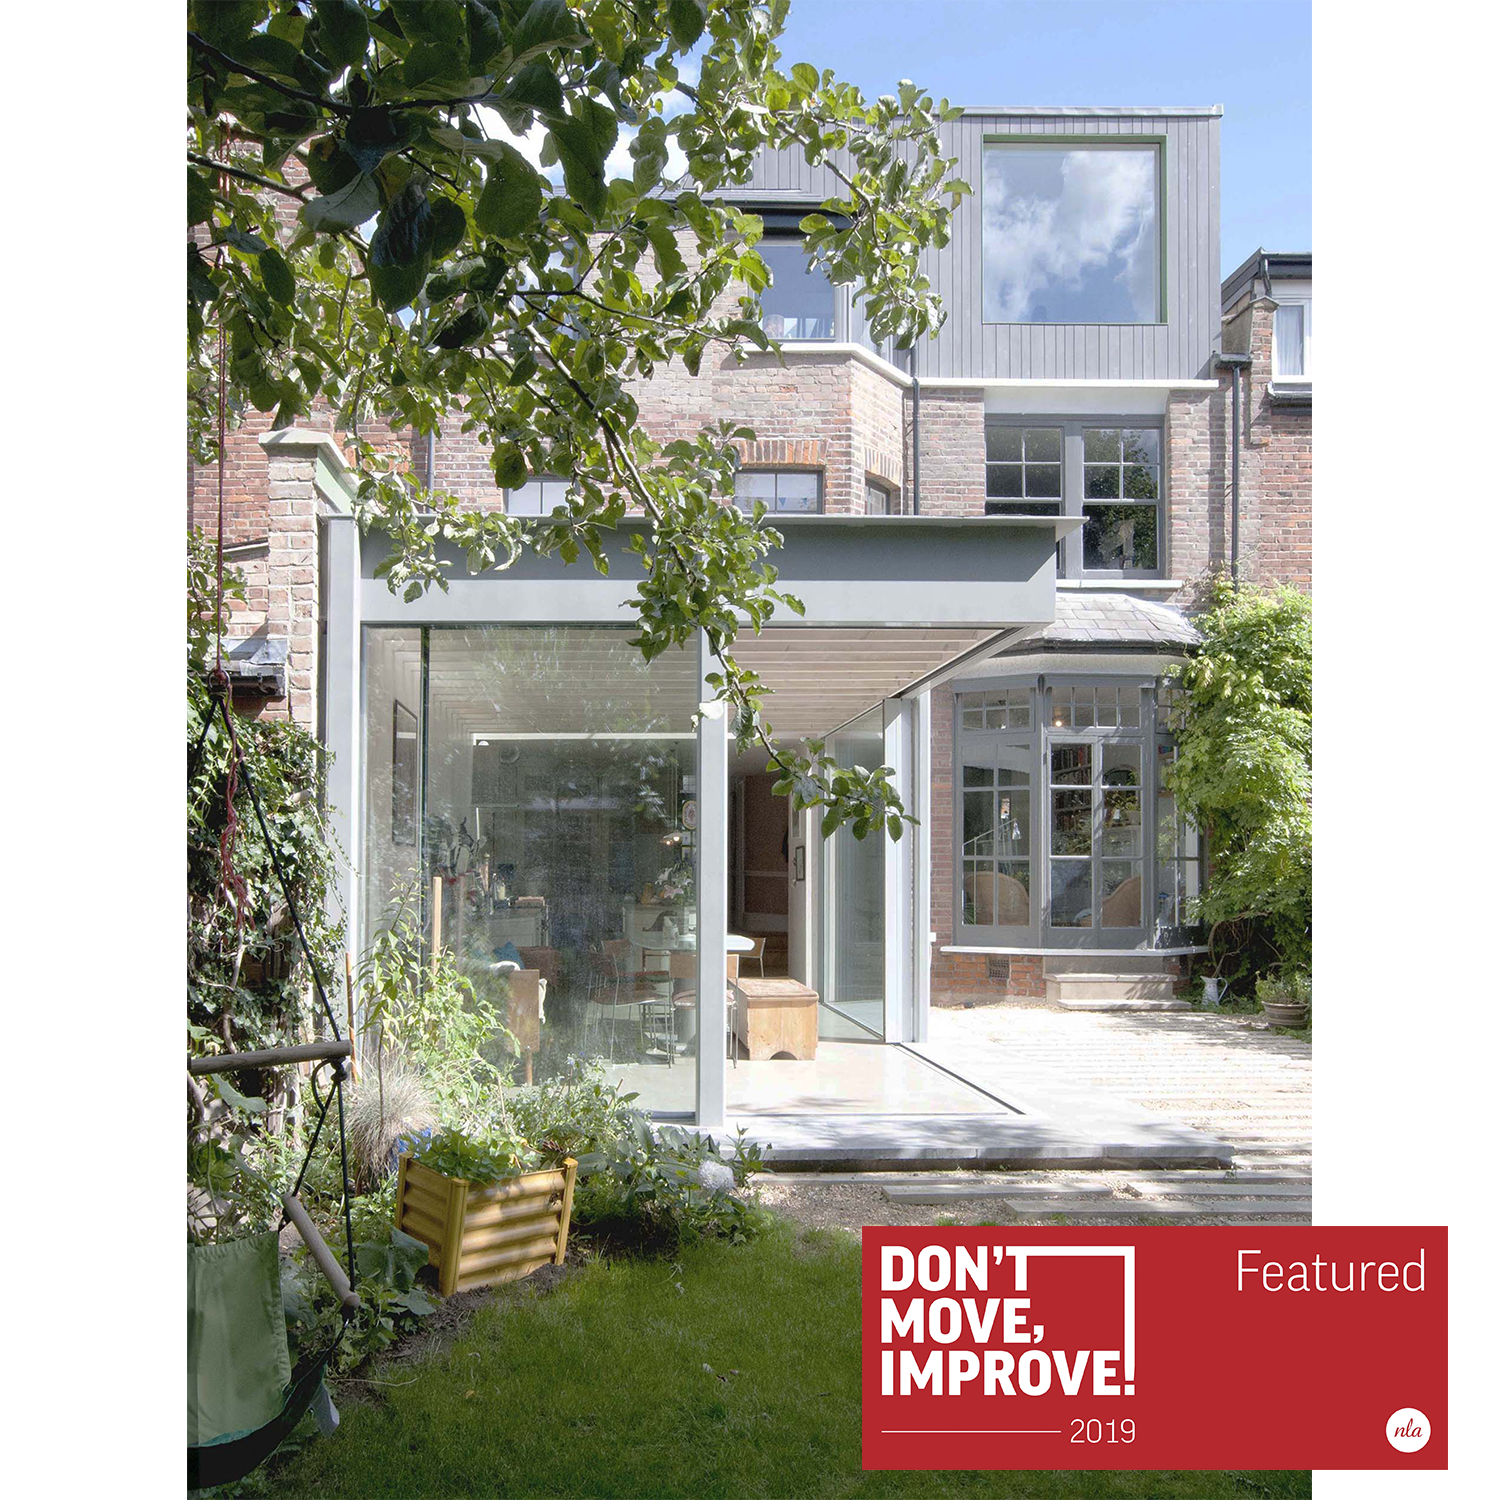 Firs Avenue Featured in the New London Architecture Dont Move Improve Awards 2019